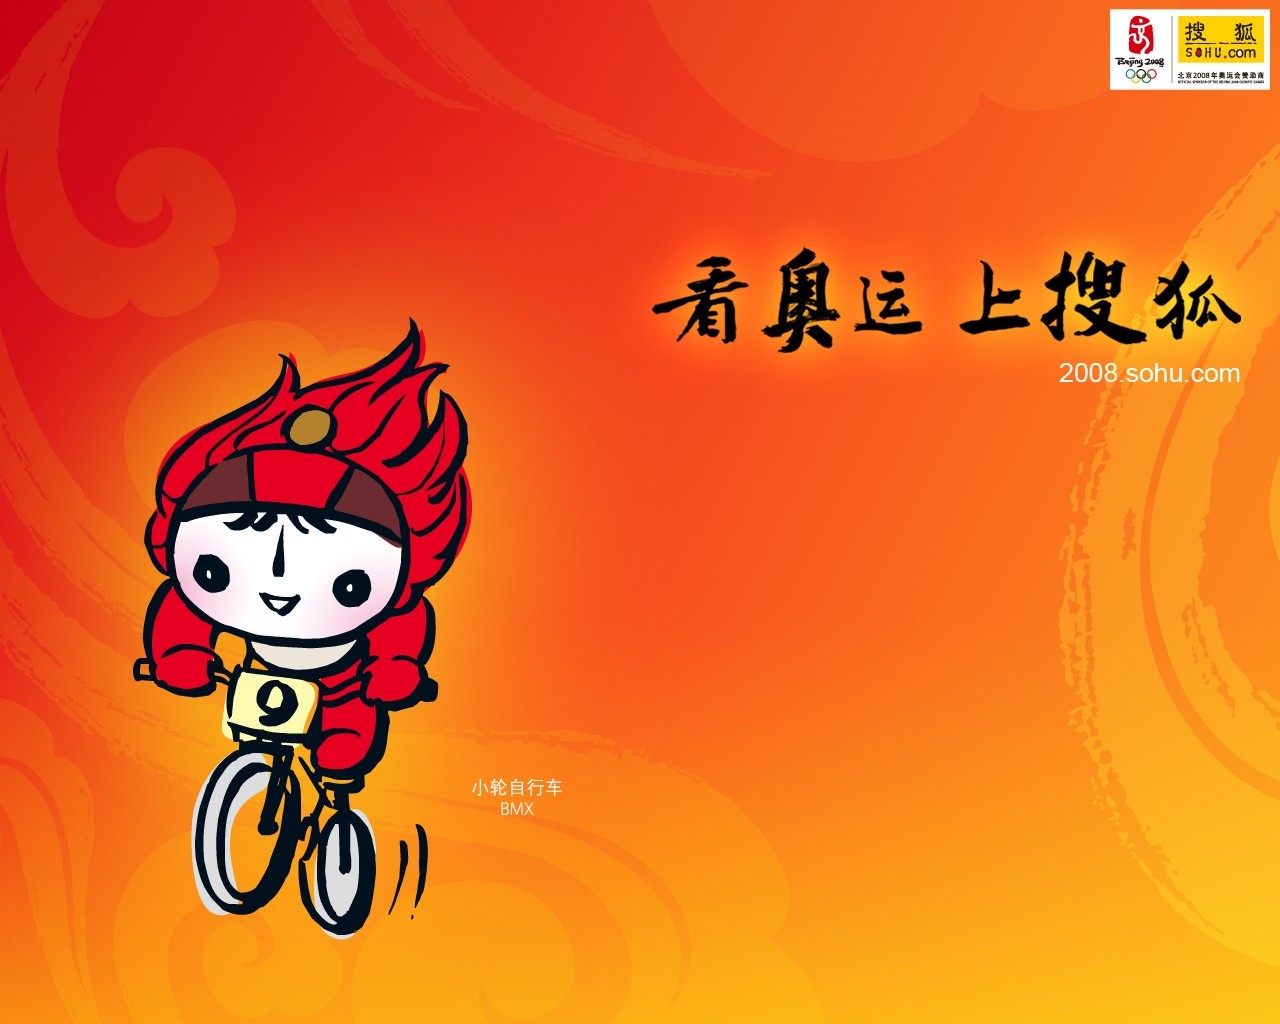 08 Olympic Games Fuwa Wallpapers #35 - 1280x1024